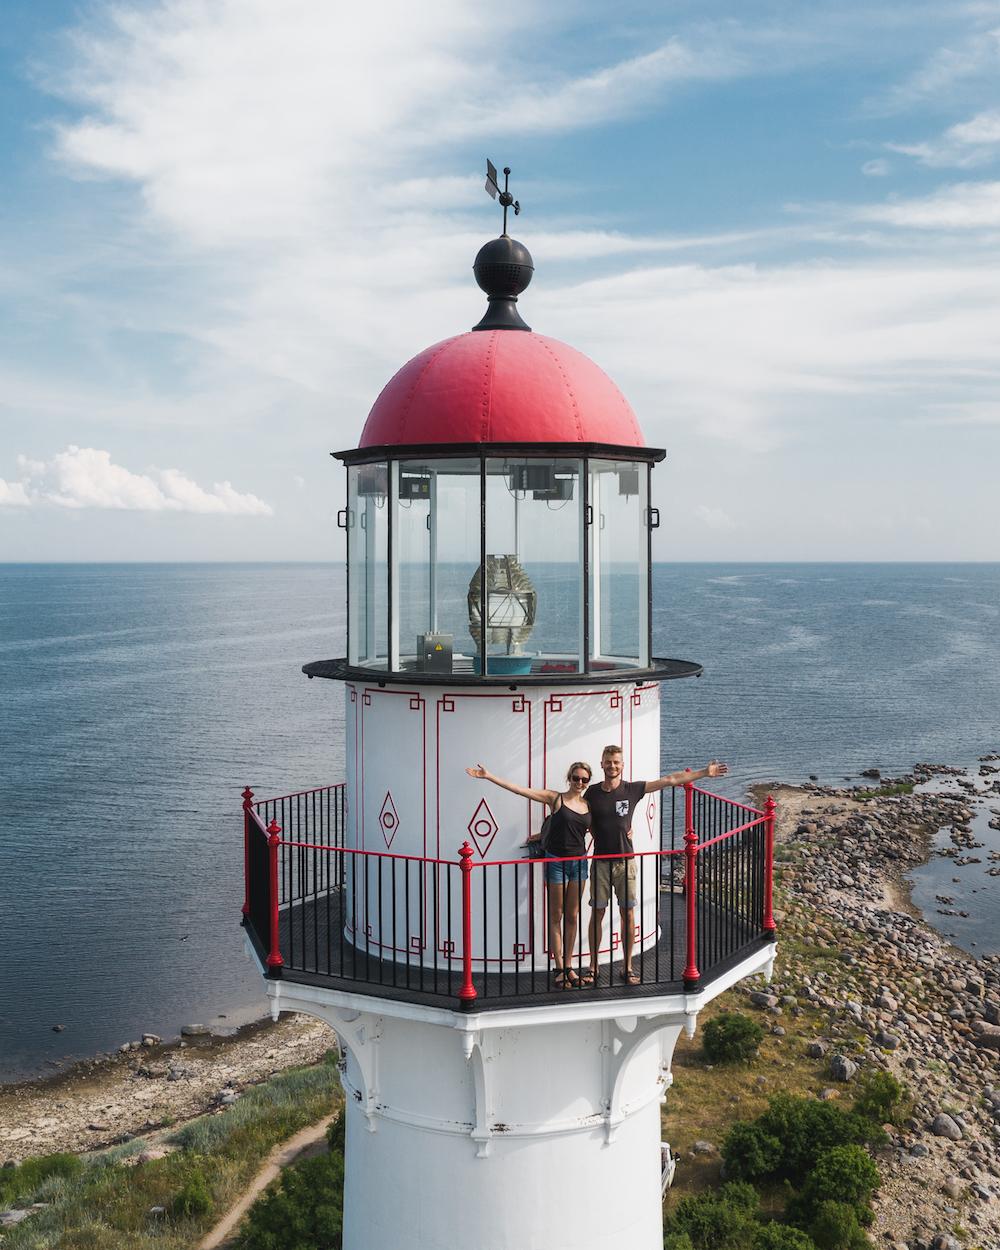 The structure of the lighthouse in Kihnu is made of cast iron. (Priidu Saart/Visit Estonia)